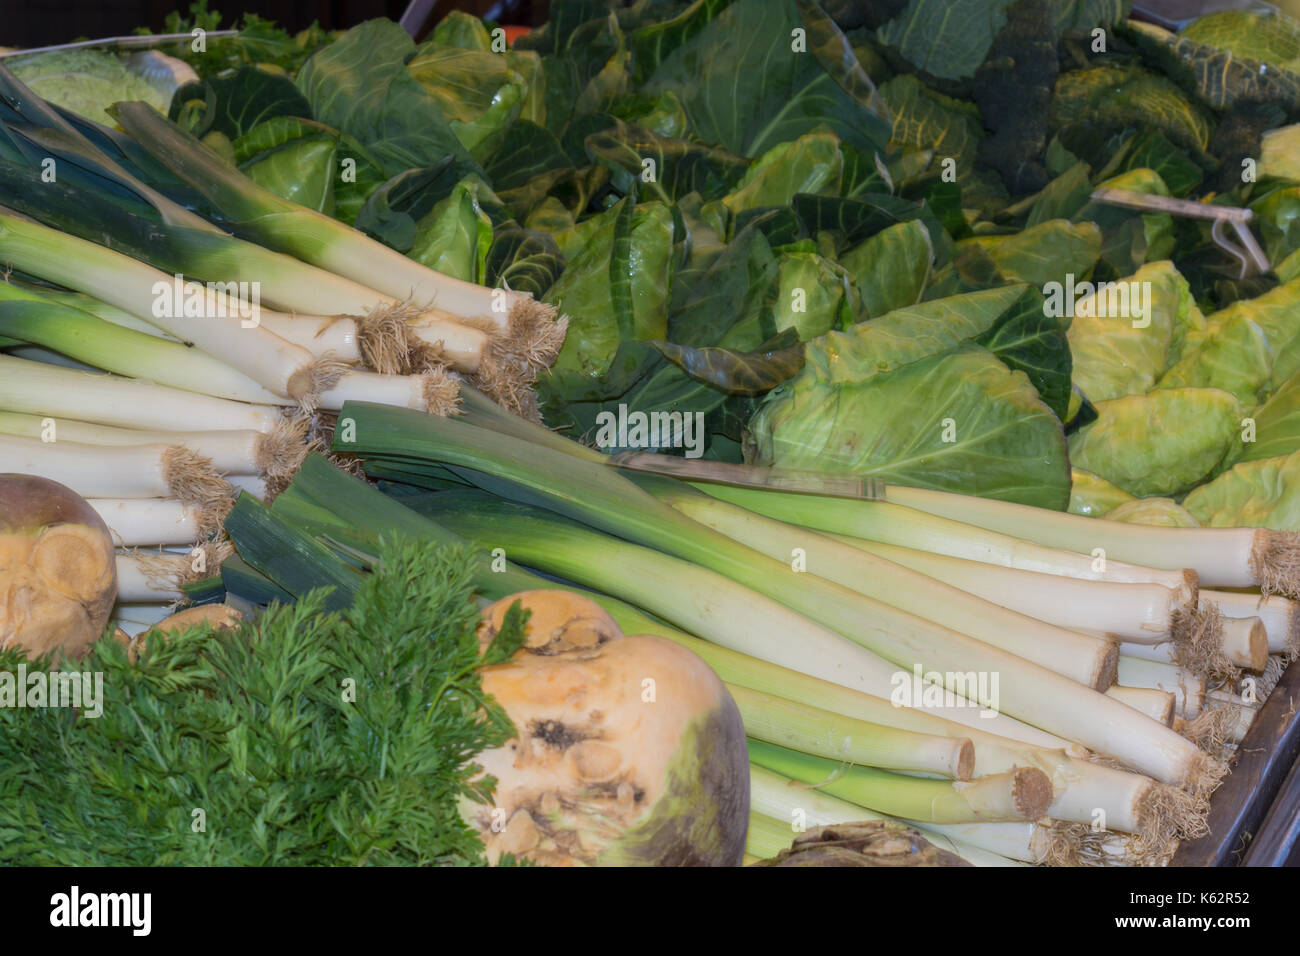 Fresh green vegetables for sale at supermarket Stock Photo